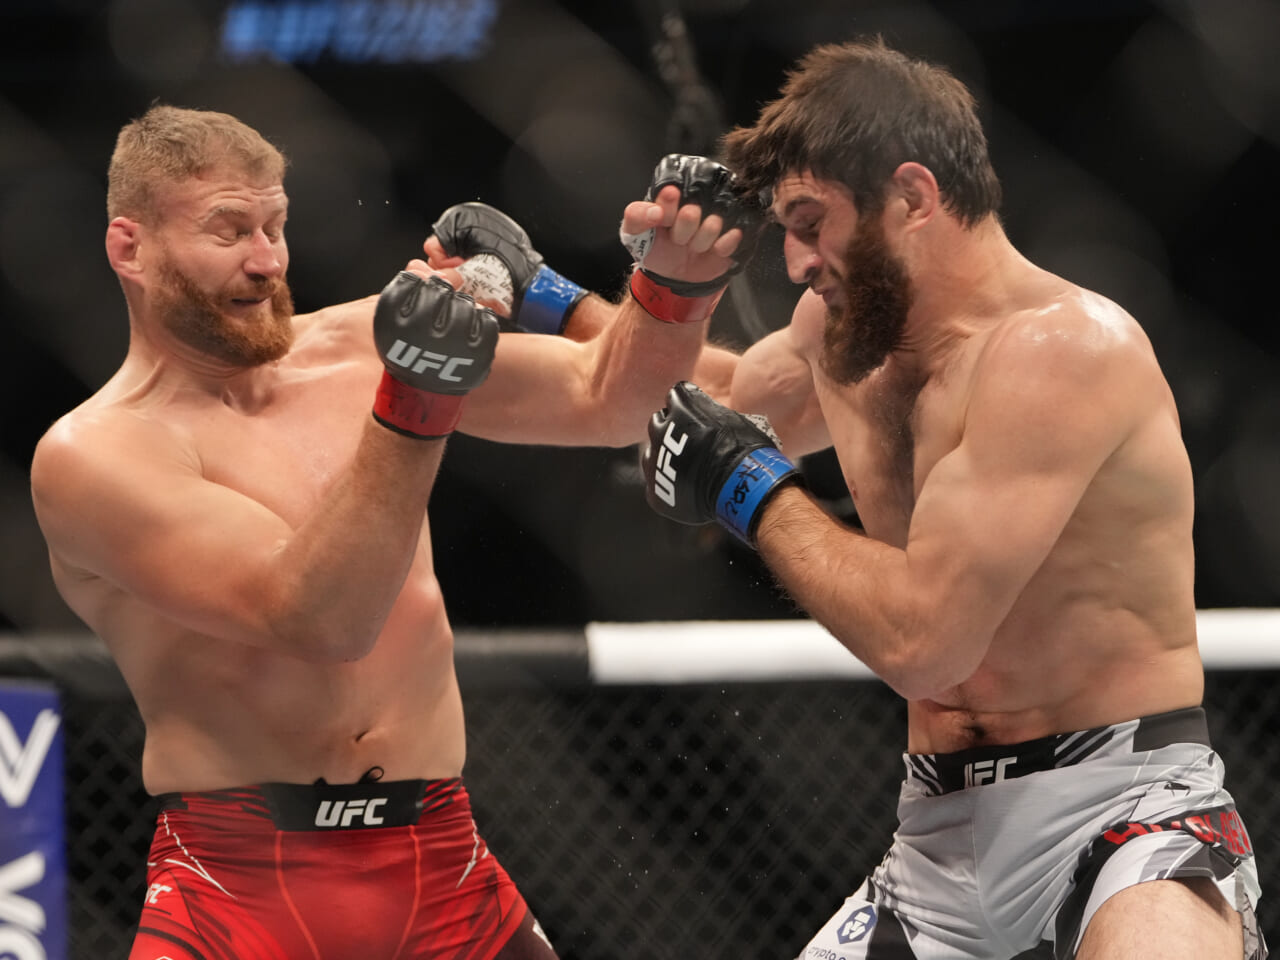 Should Jan Blachowicz and Magomed Ankalaev run it back after UFC 282?